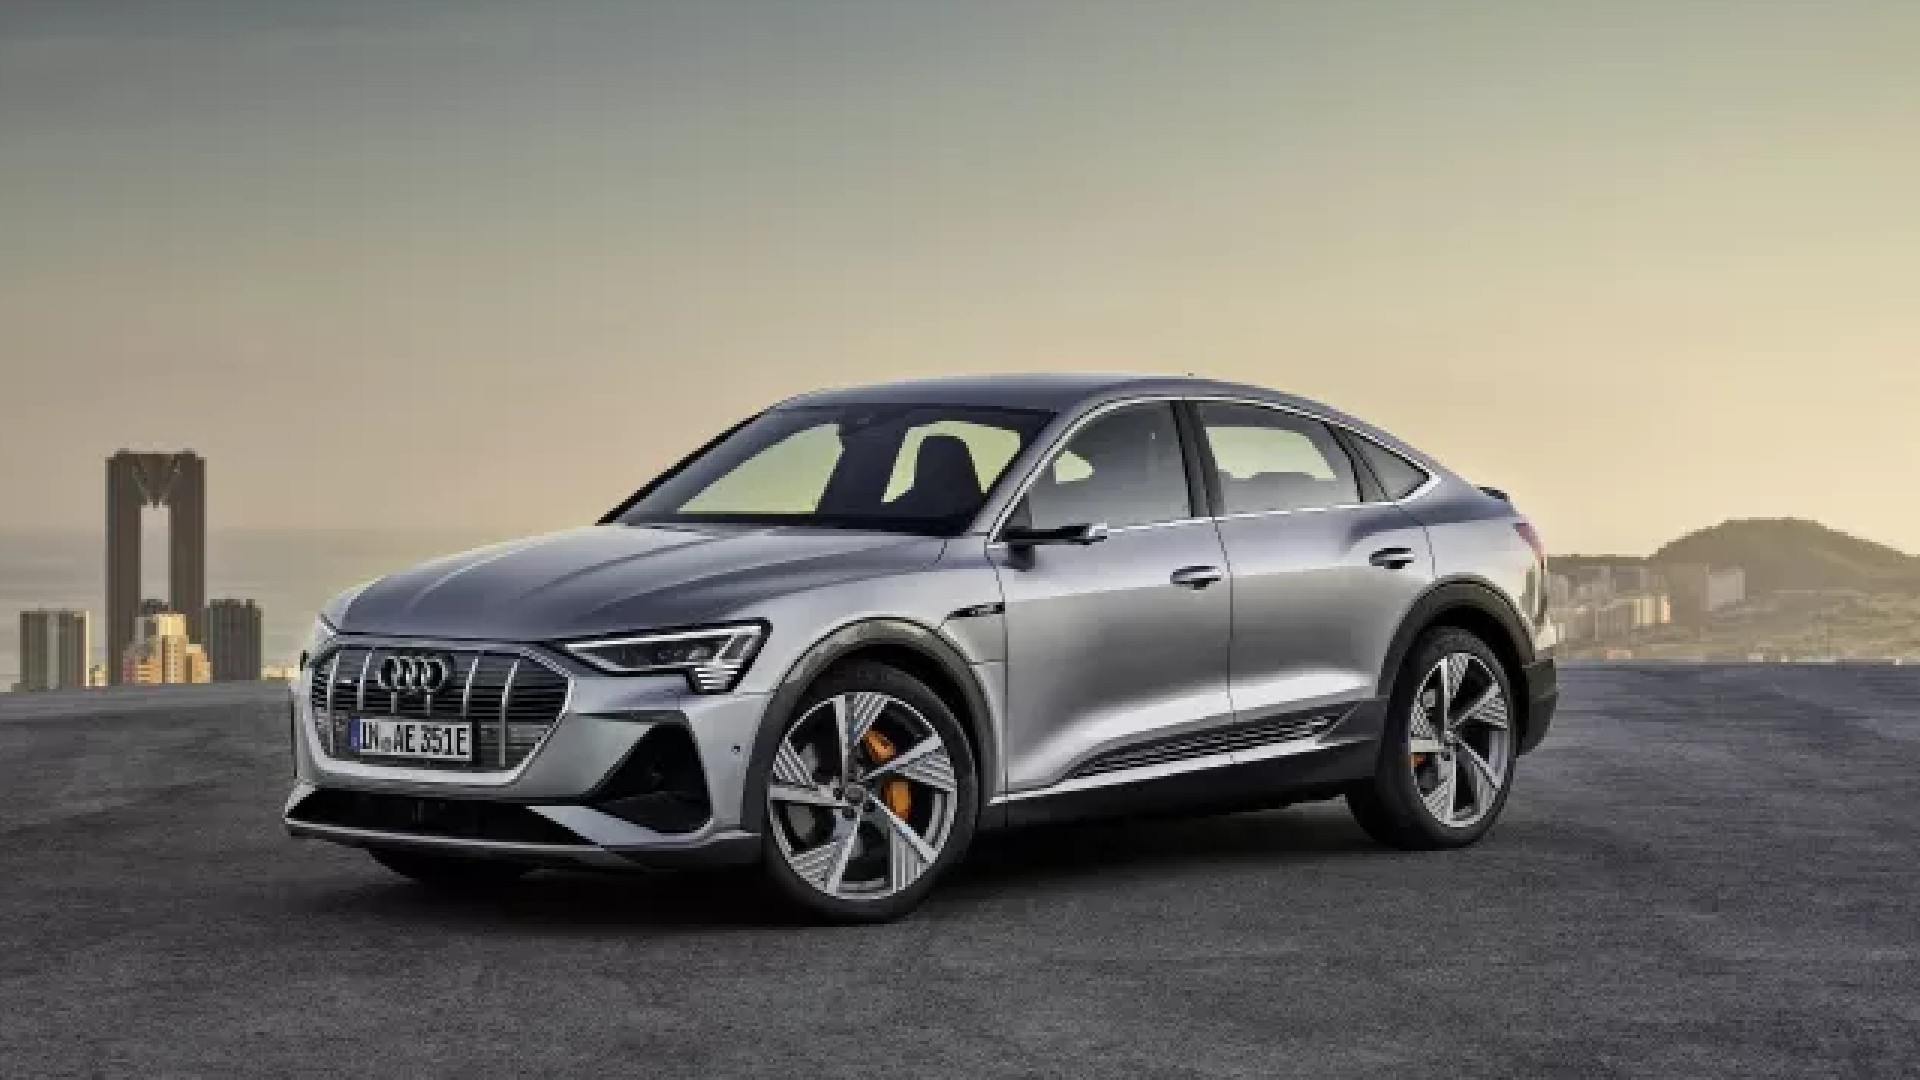 The Audi internal combustion car will become extinct by 2033